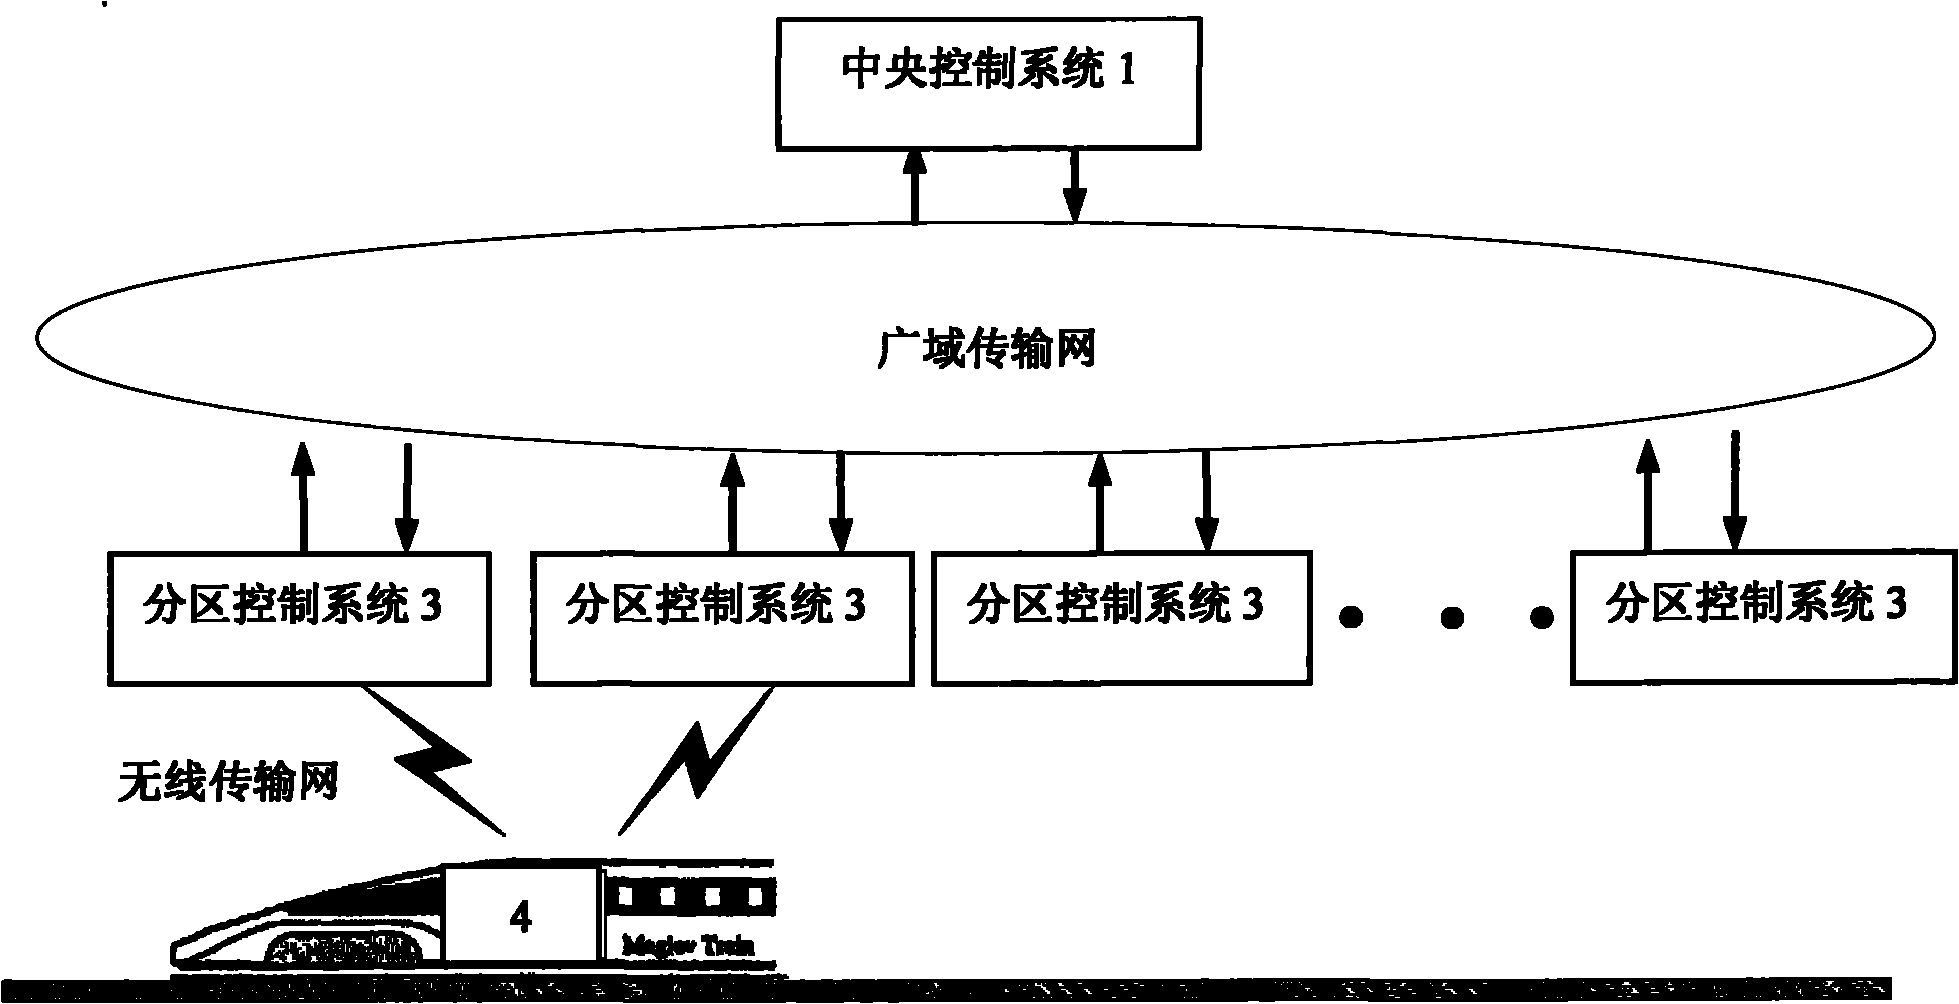 Traffic information network architecture system of self-controlling dispersion track